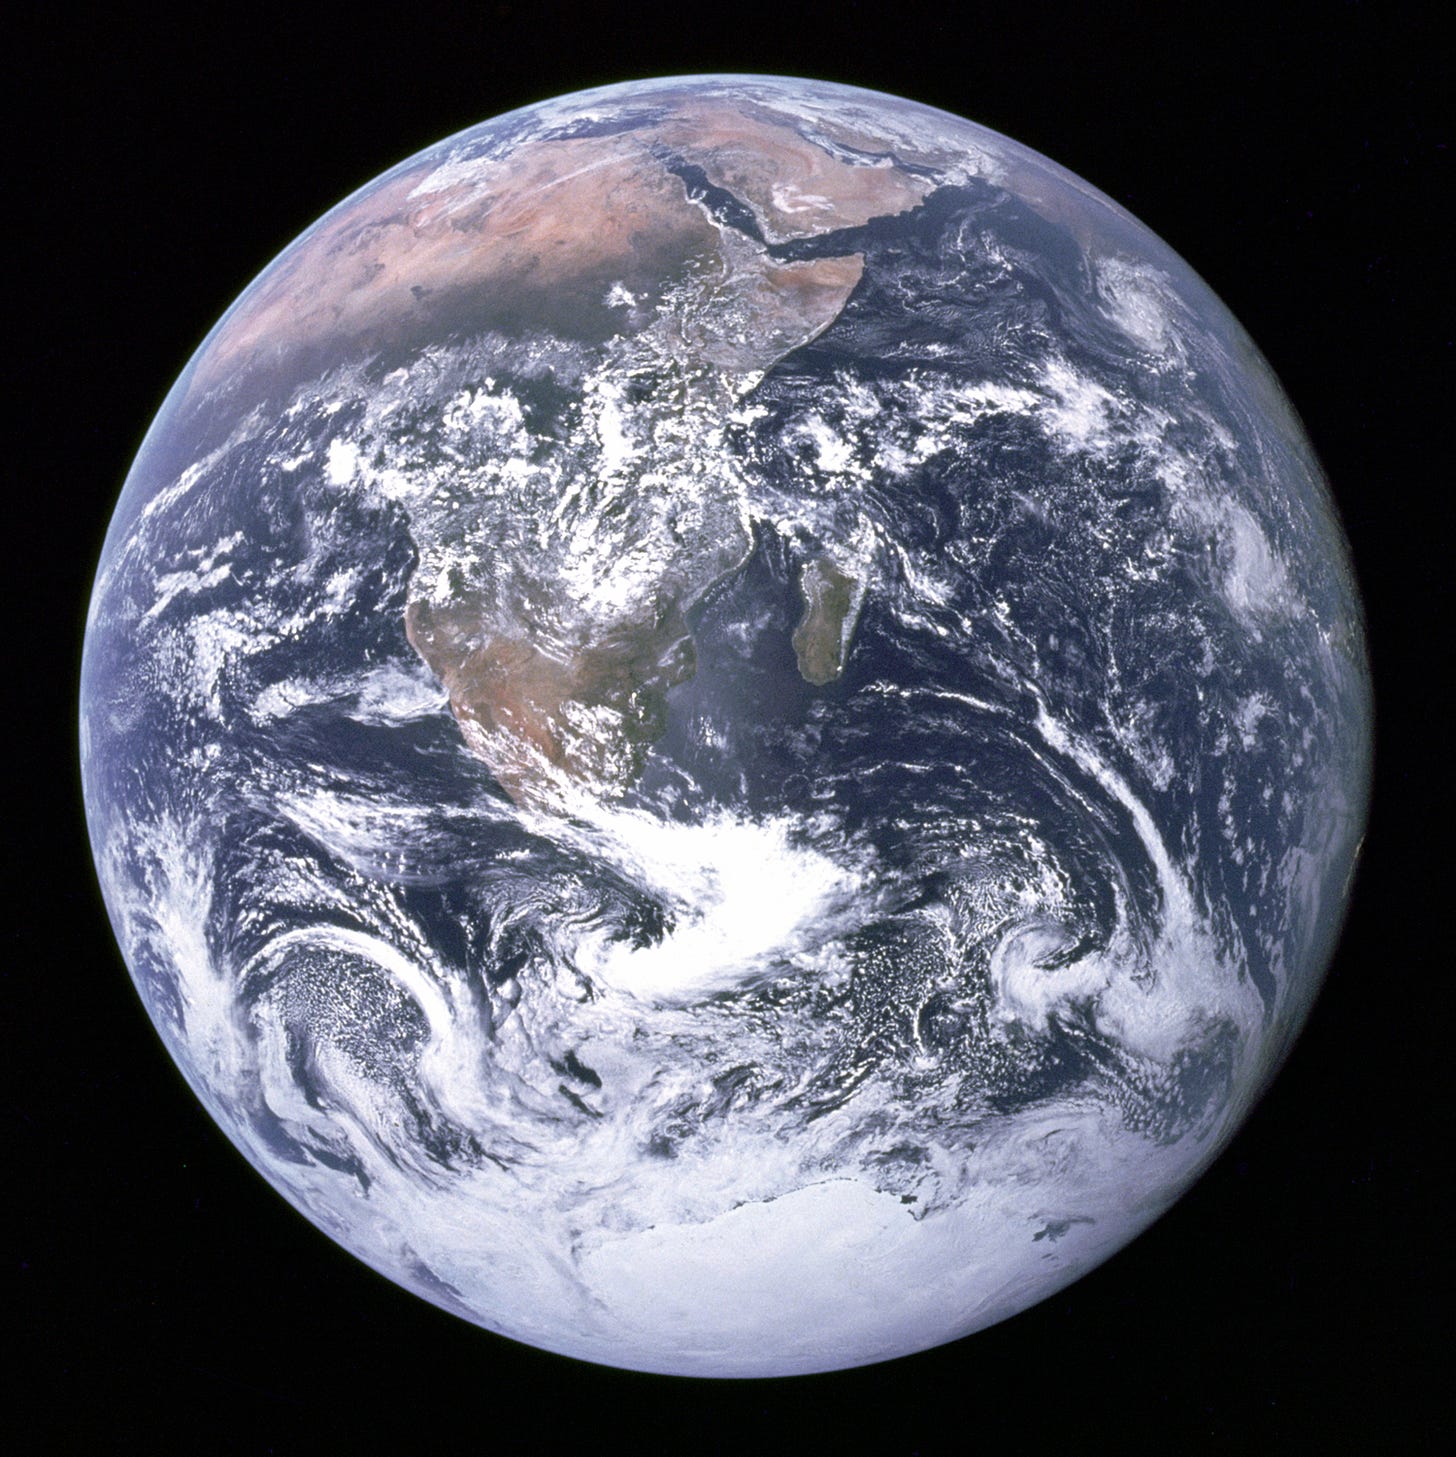 https://upload.wikimedia.org/wikipedia/commons/9/97/The_Earth_seen_from_Apollo_17.jpg